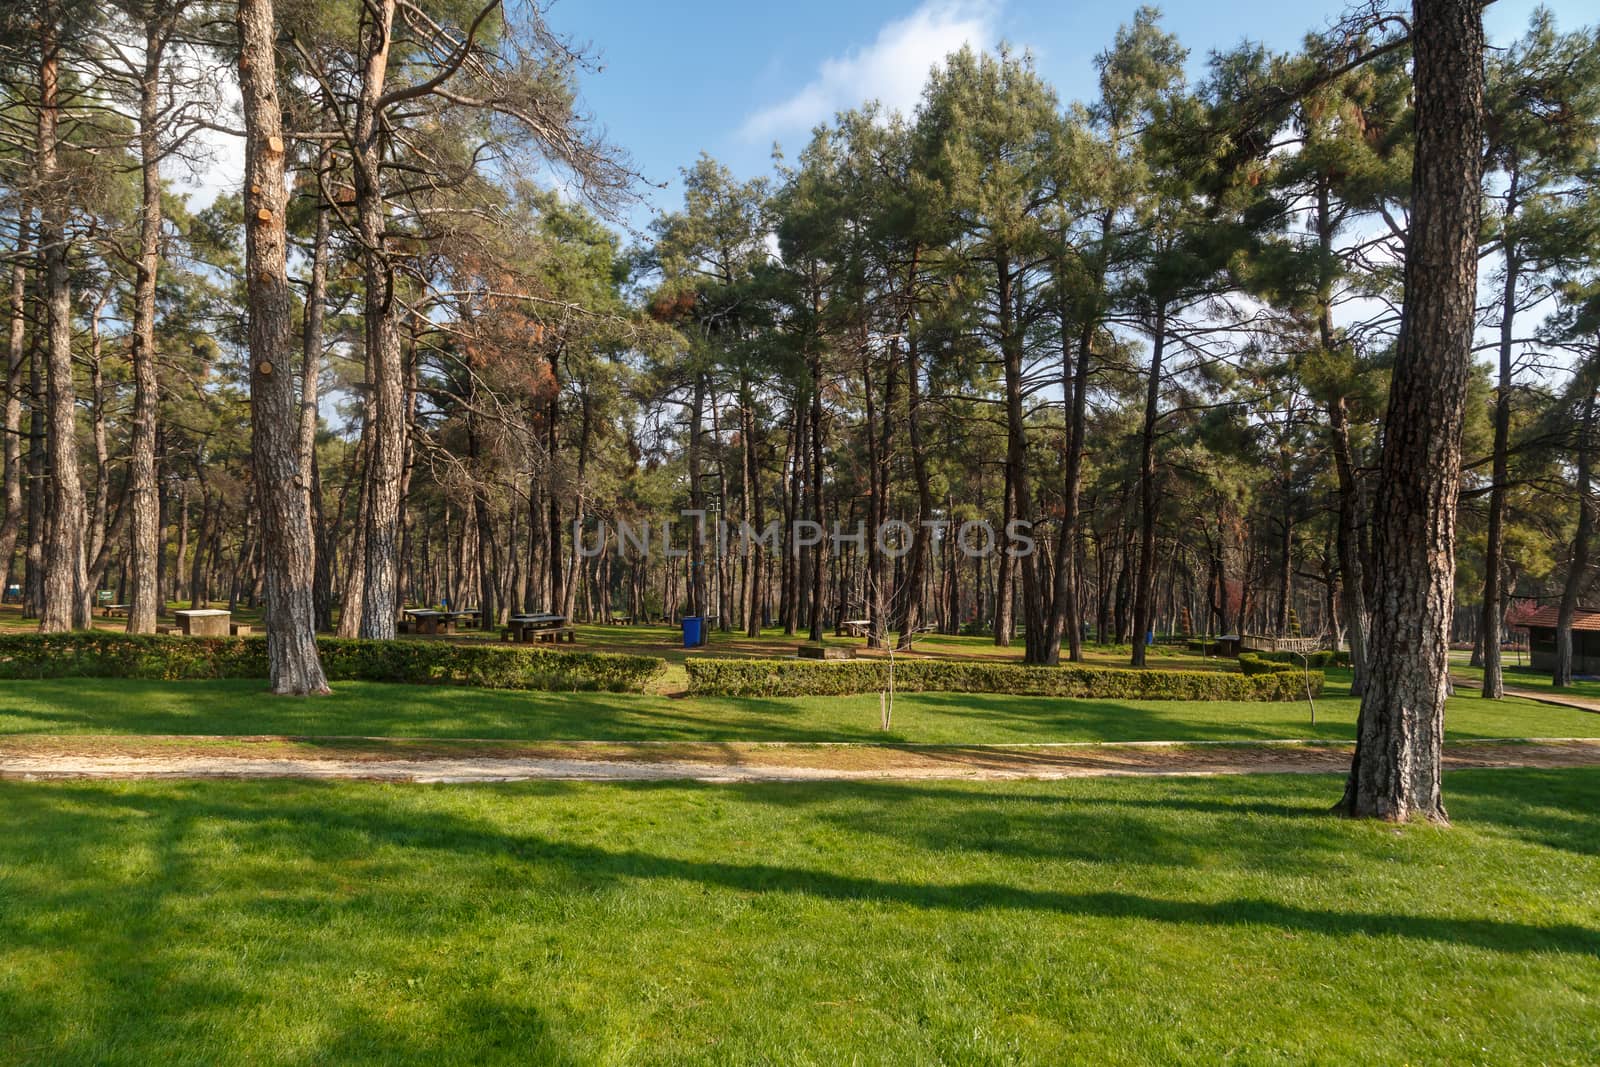 View of a big park with pine trees and meadow area around.